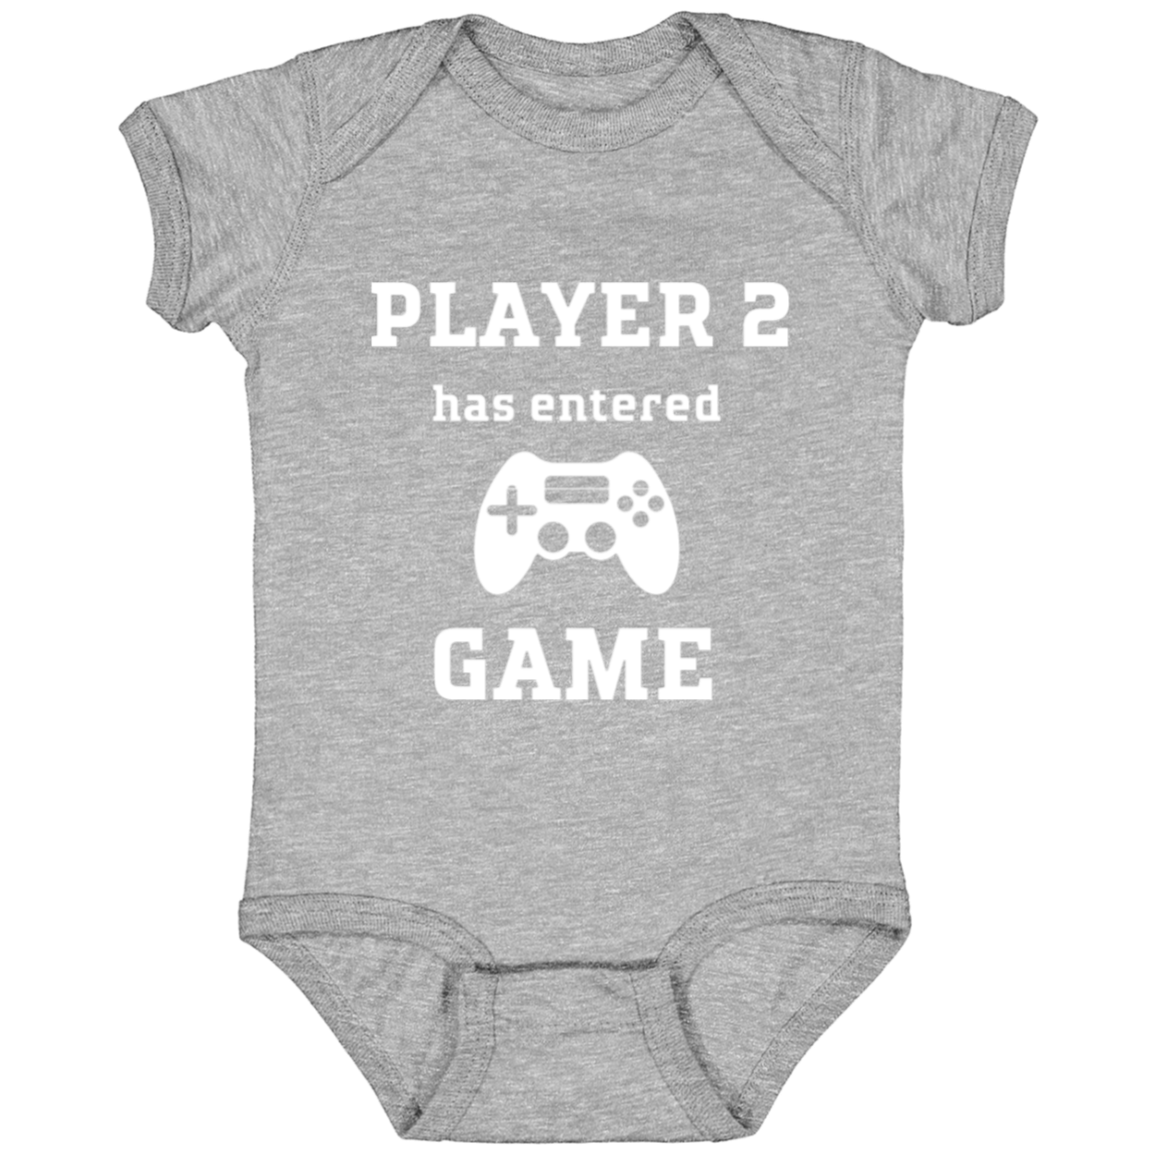 Leveled Up to Daddy Player 2 Has Entered the Game Shirt